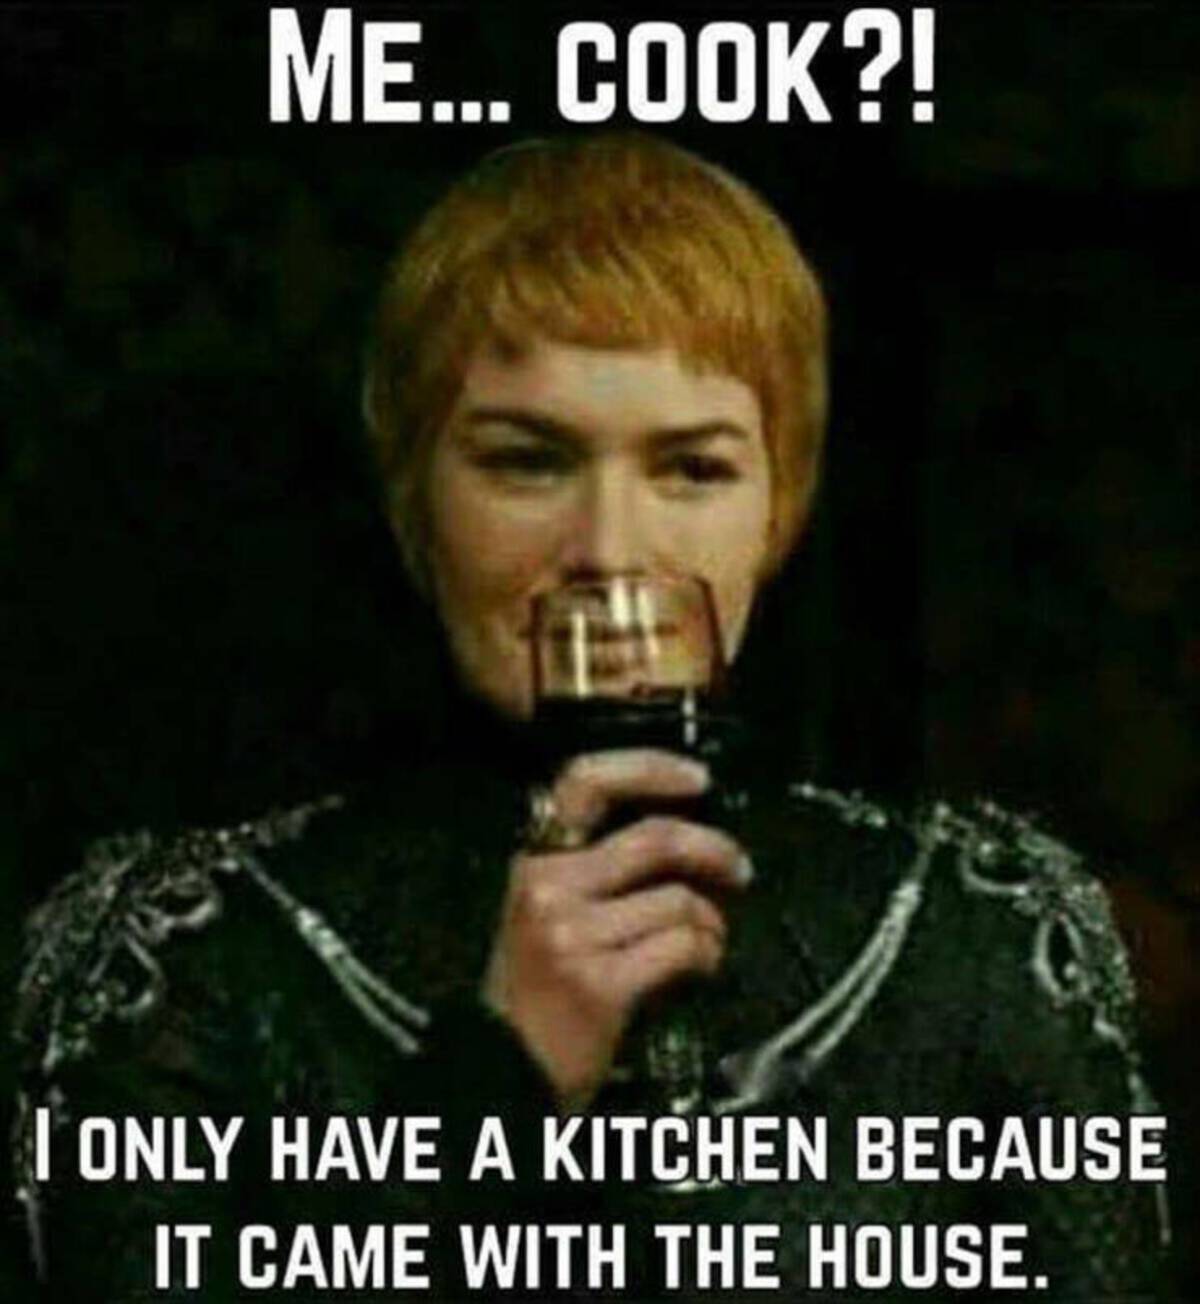 Me... Cook?! I Only Have A Kitchen Because It Came With The House.